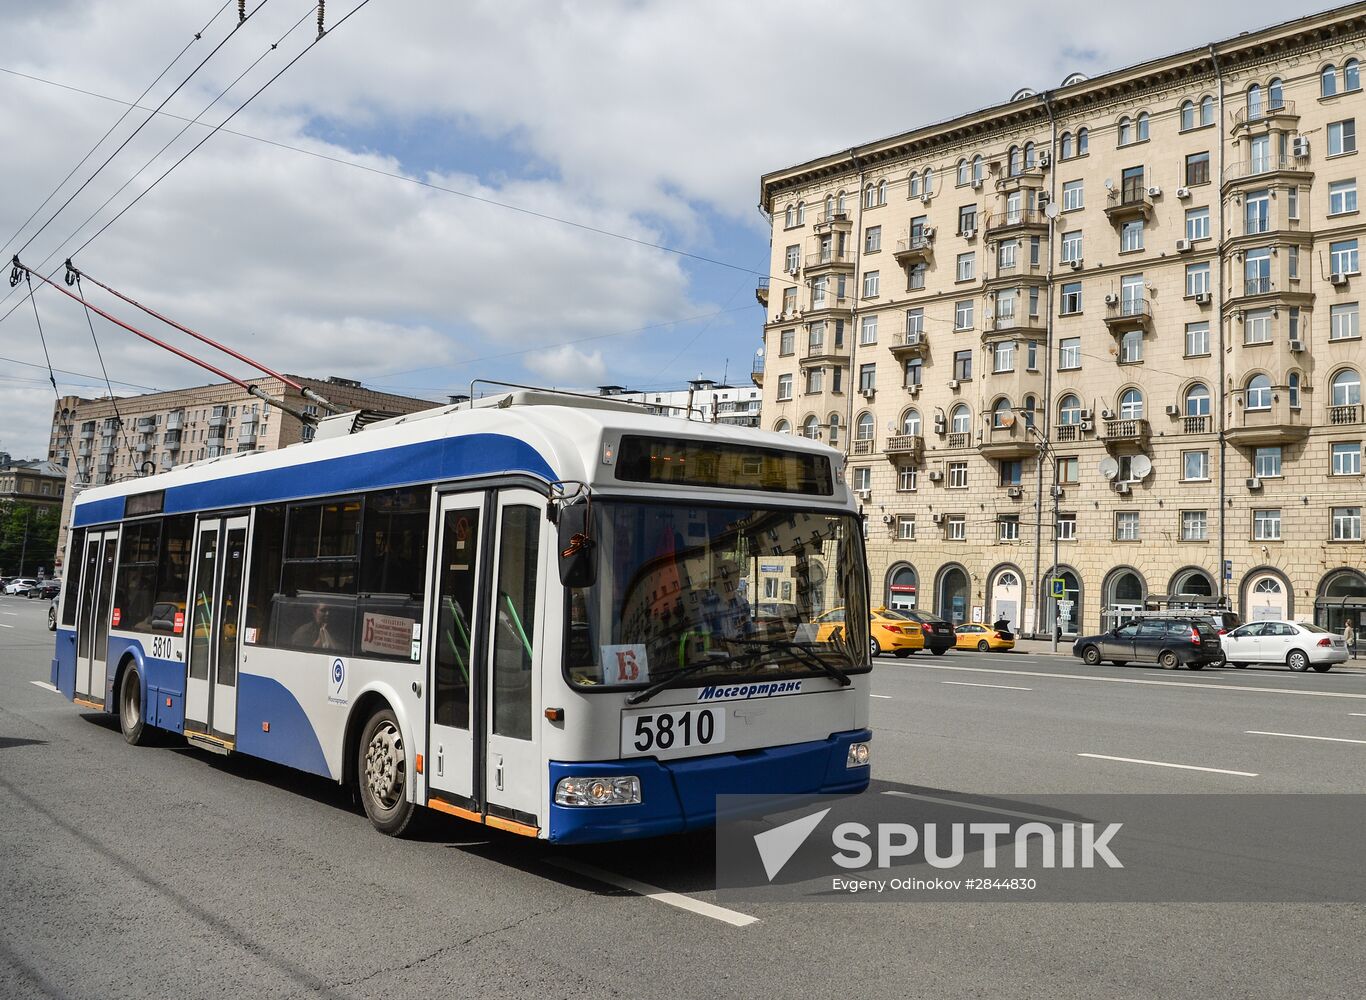 B trolleybus route in Moscow